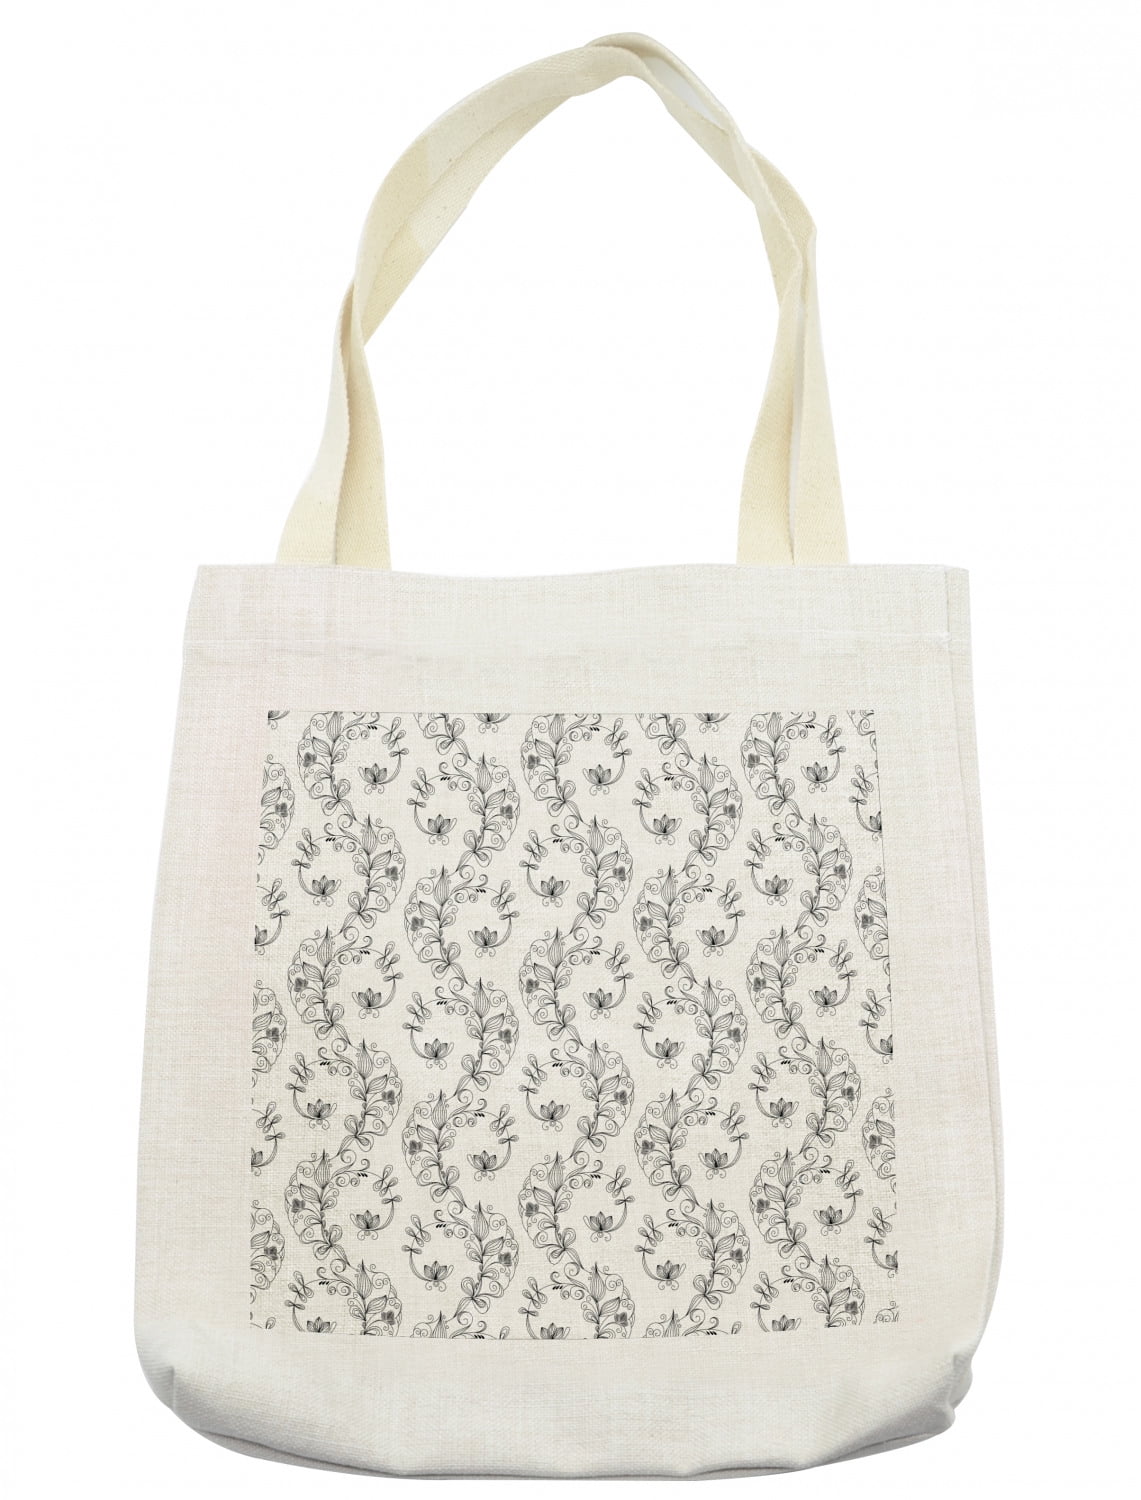 Black and White Tote Bag, Scroll and Swirls Pattern with Tiny Stems Full of Leaves and Lilies ...